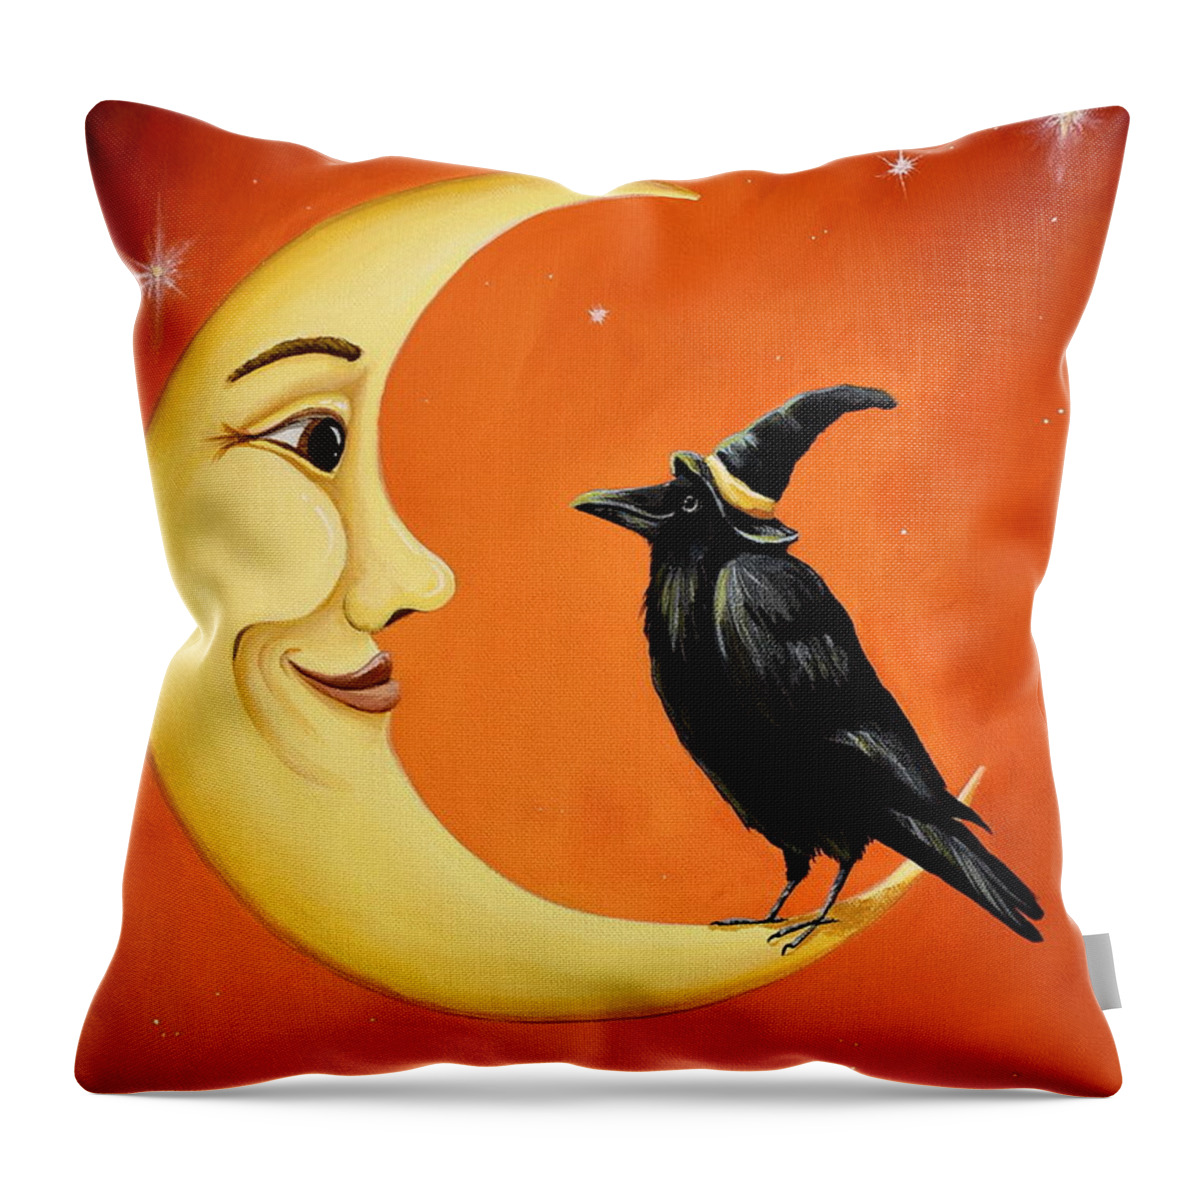 Moon Throw Pillow featuring the painting Moon And Crow  by Debbie Criswell